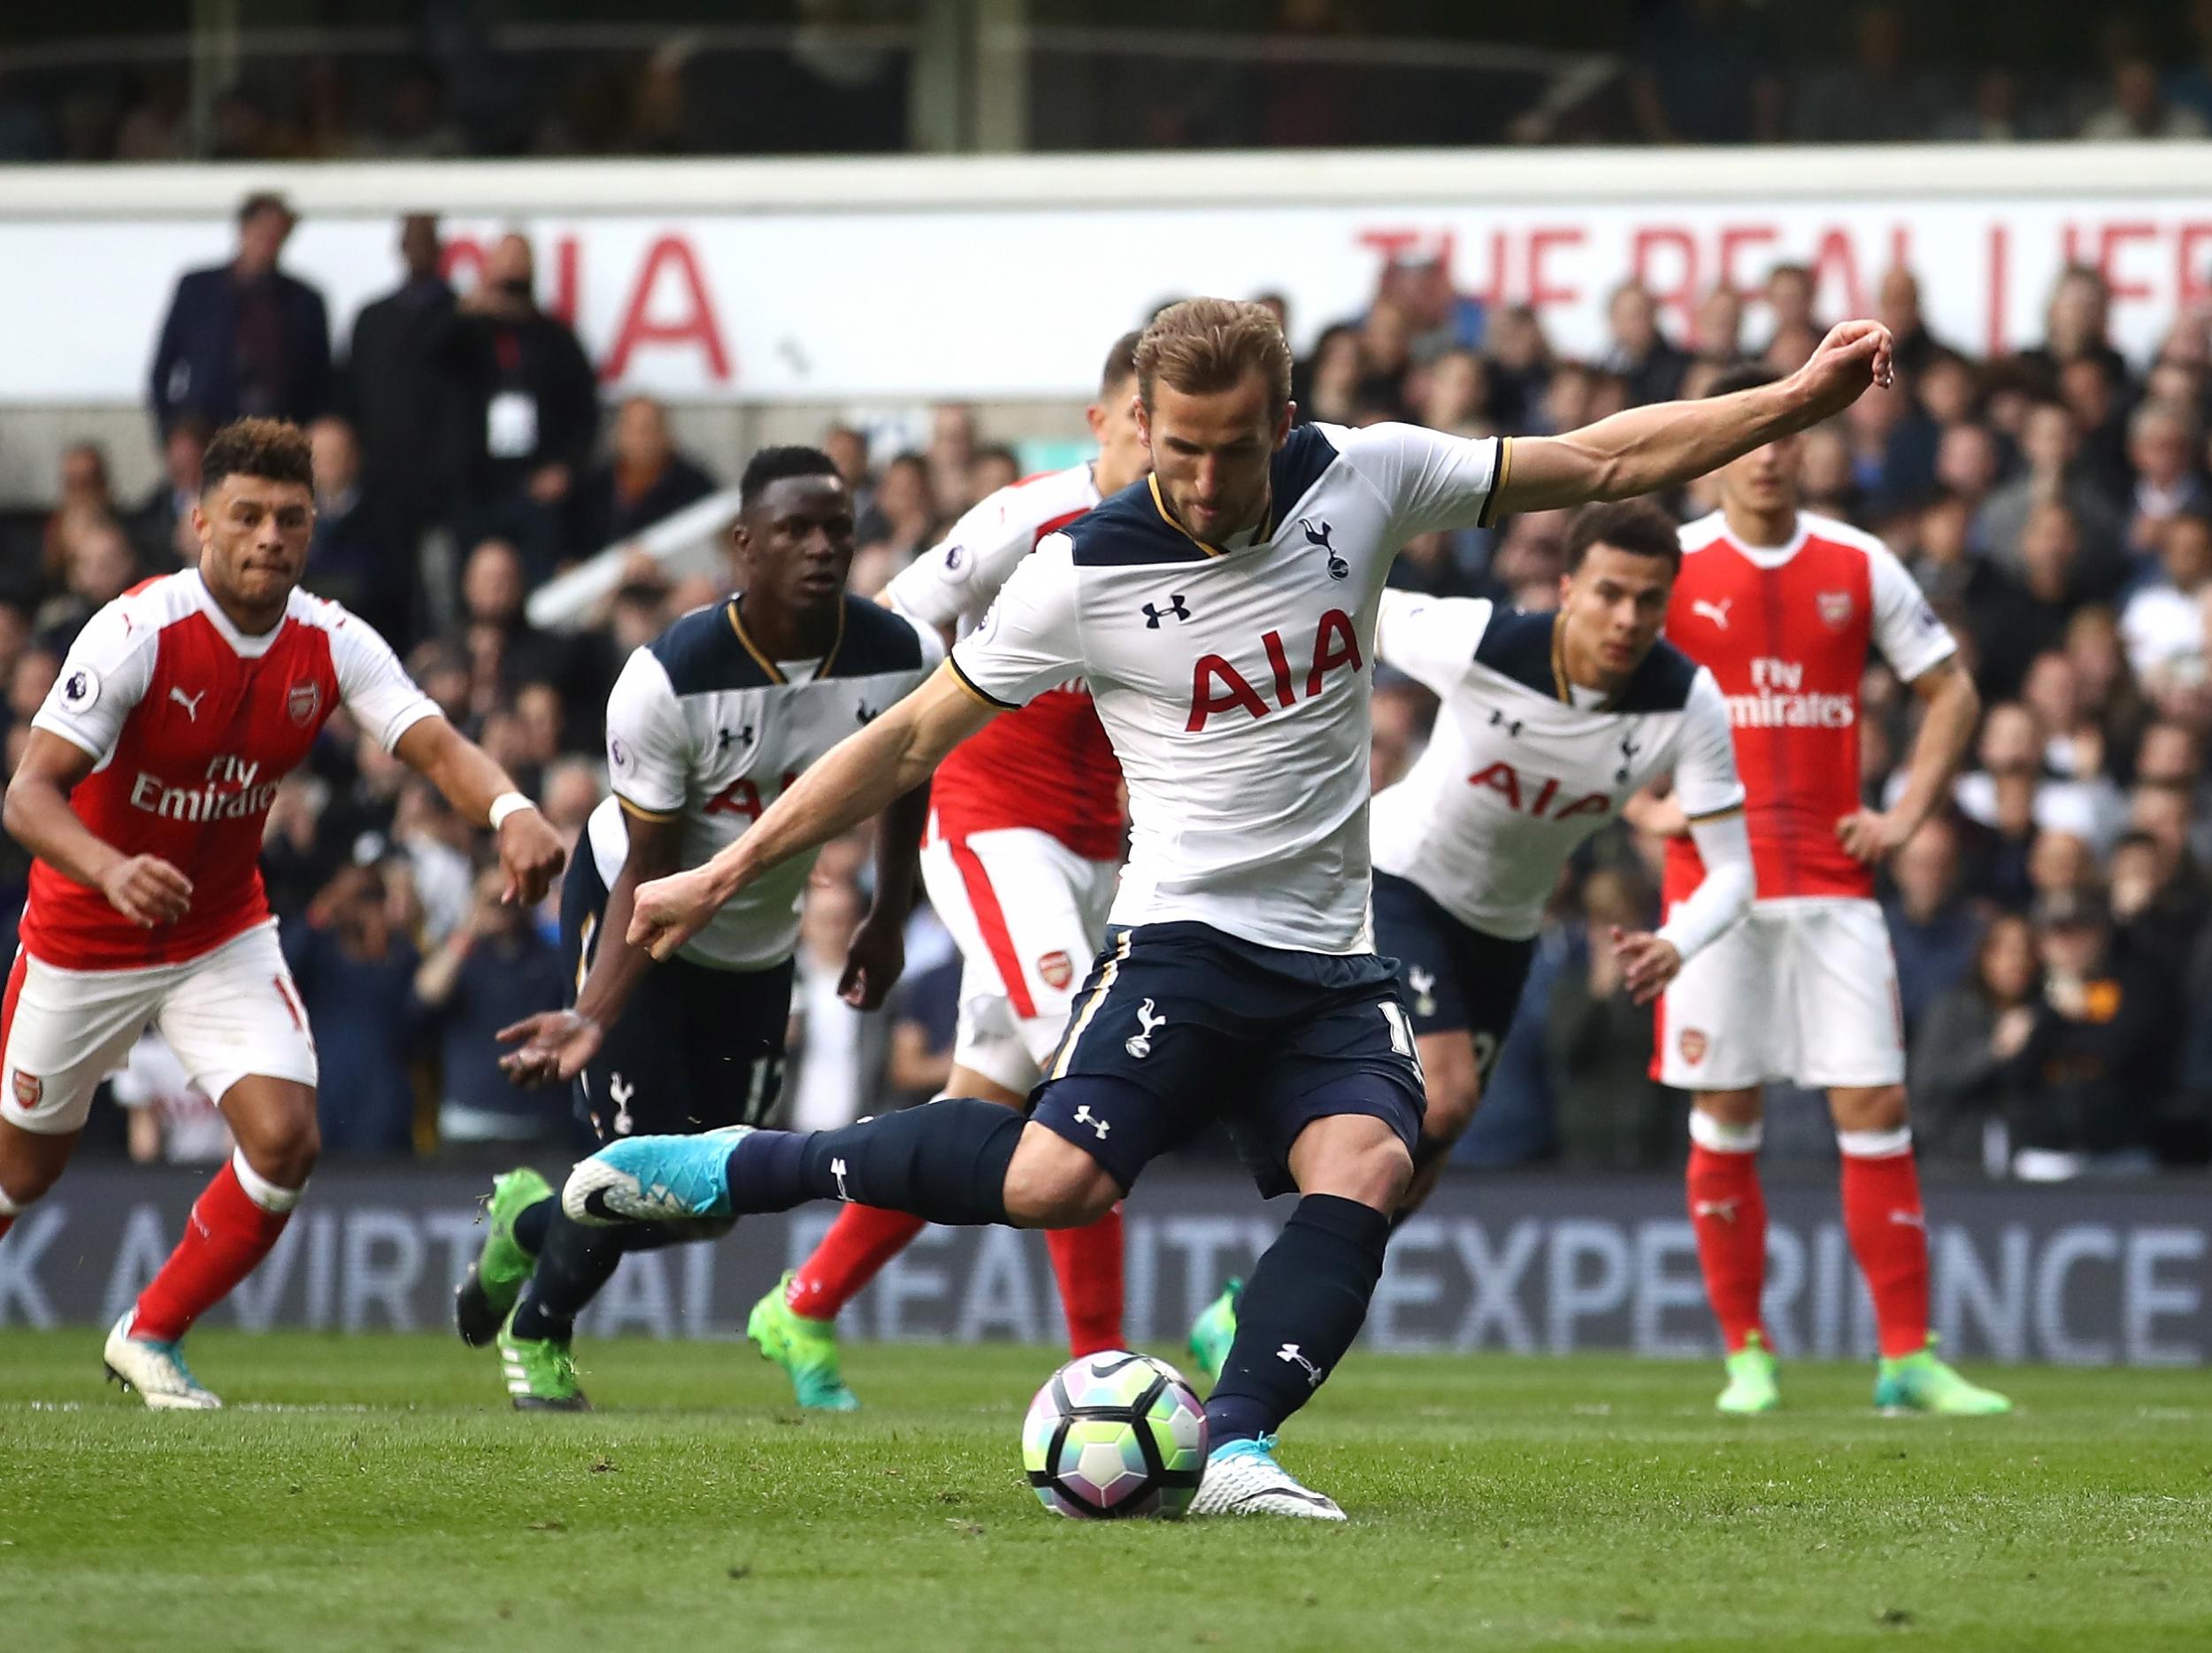 Kane stepped up to double Tottenham's lead from the penalty spot